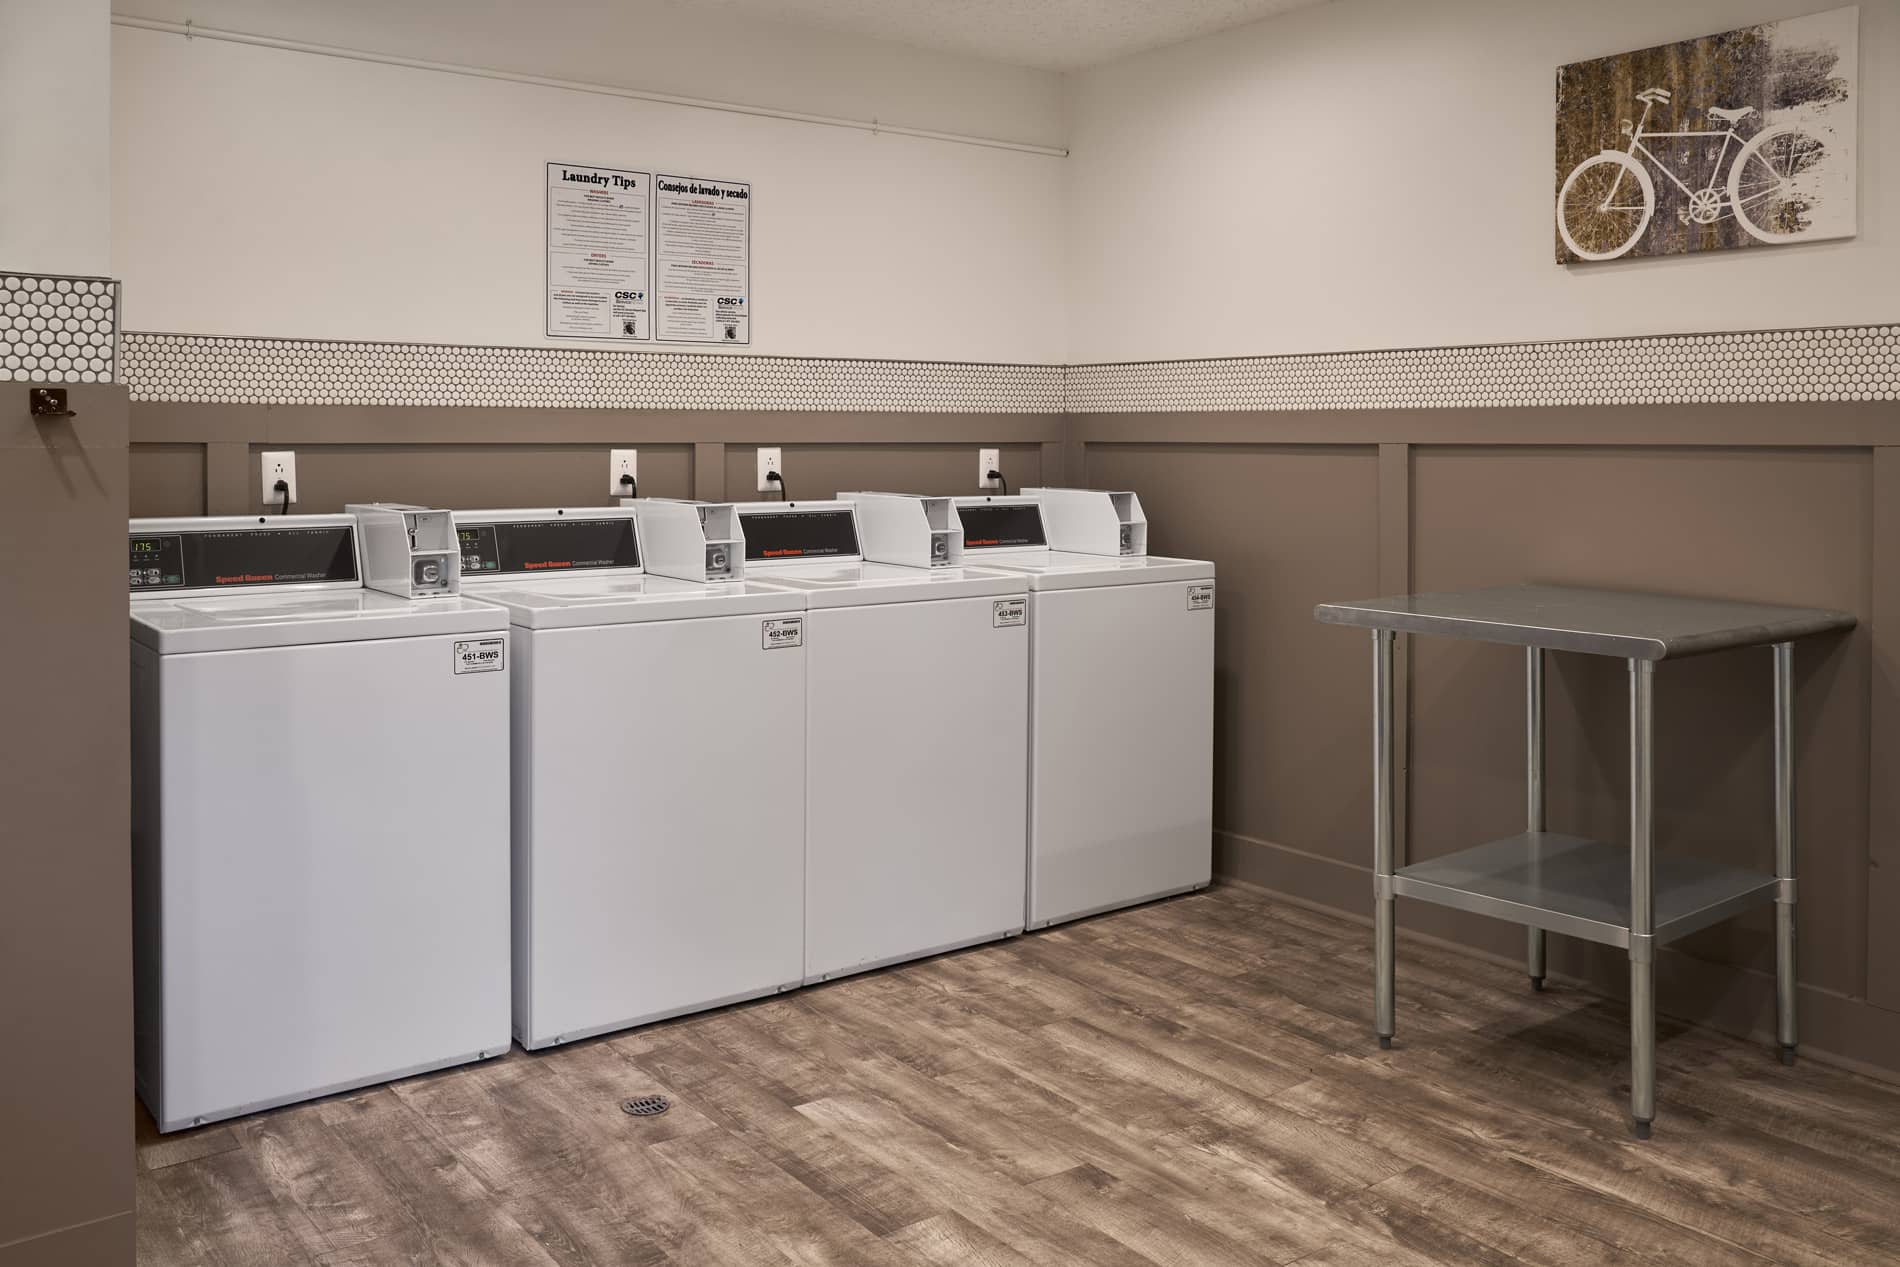 Legacy Hill Laundry Room